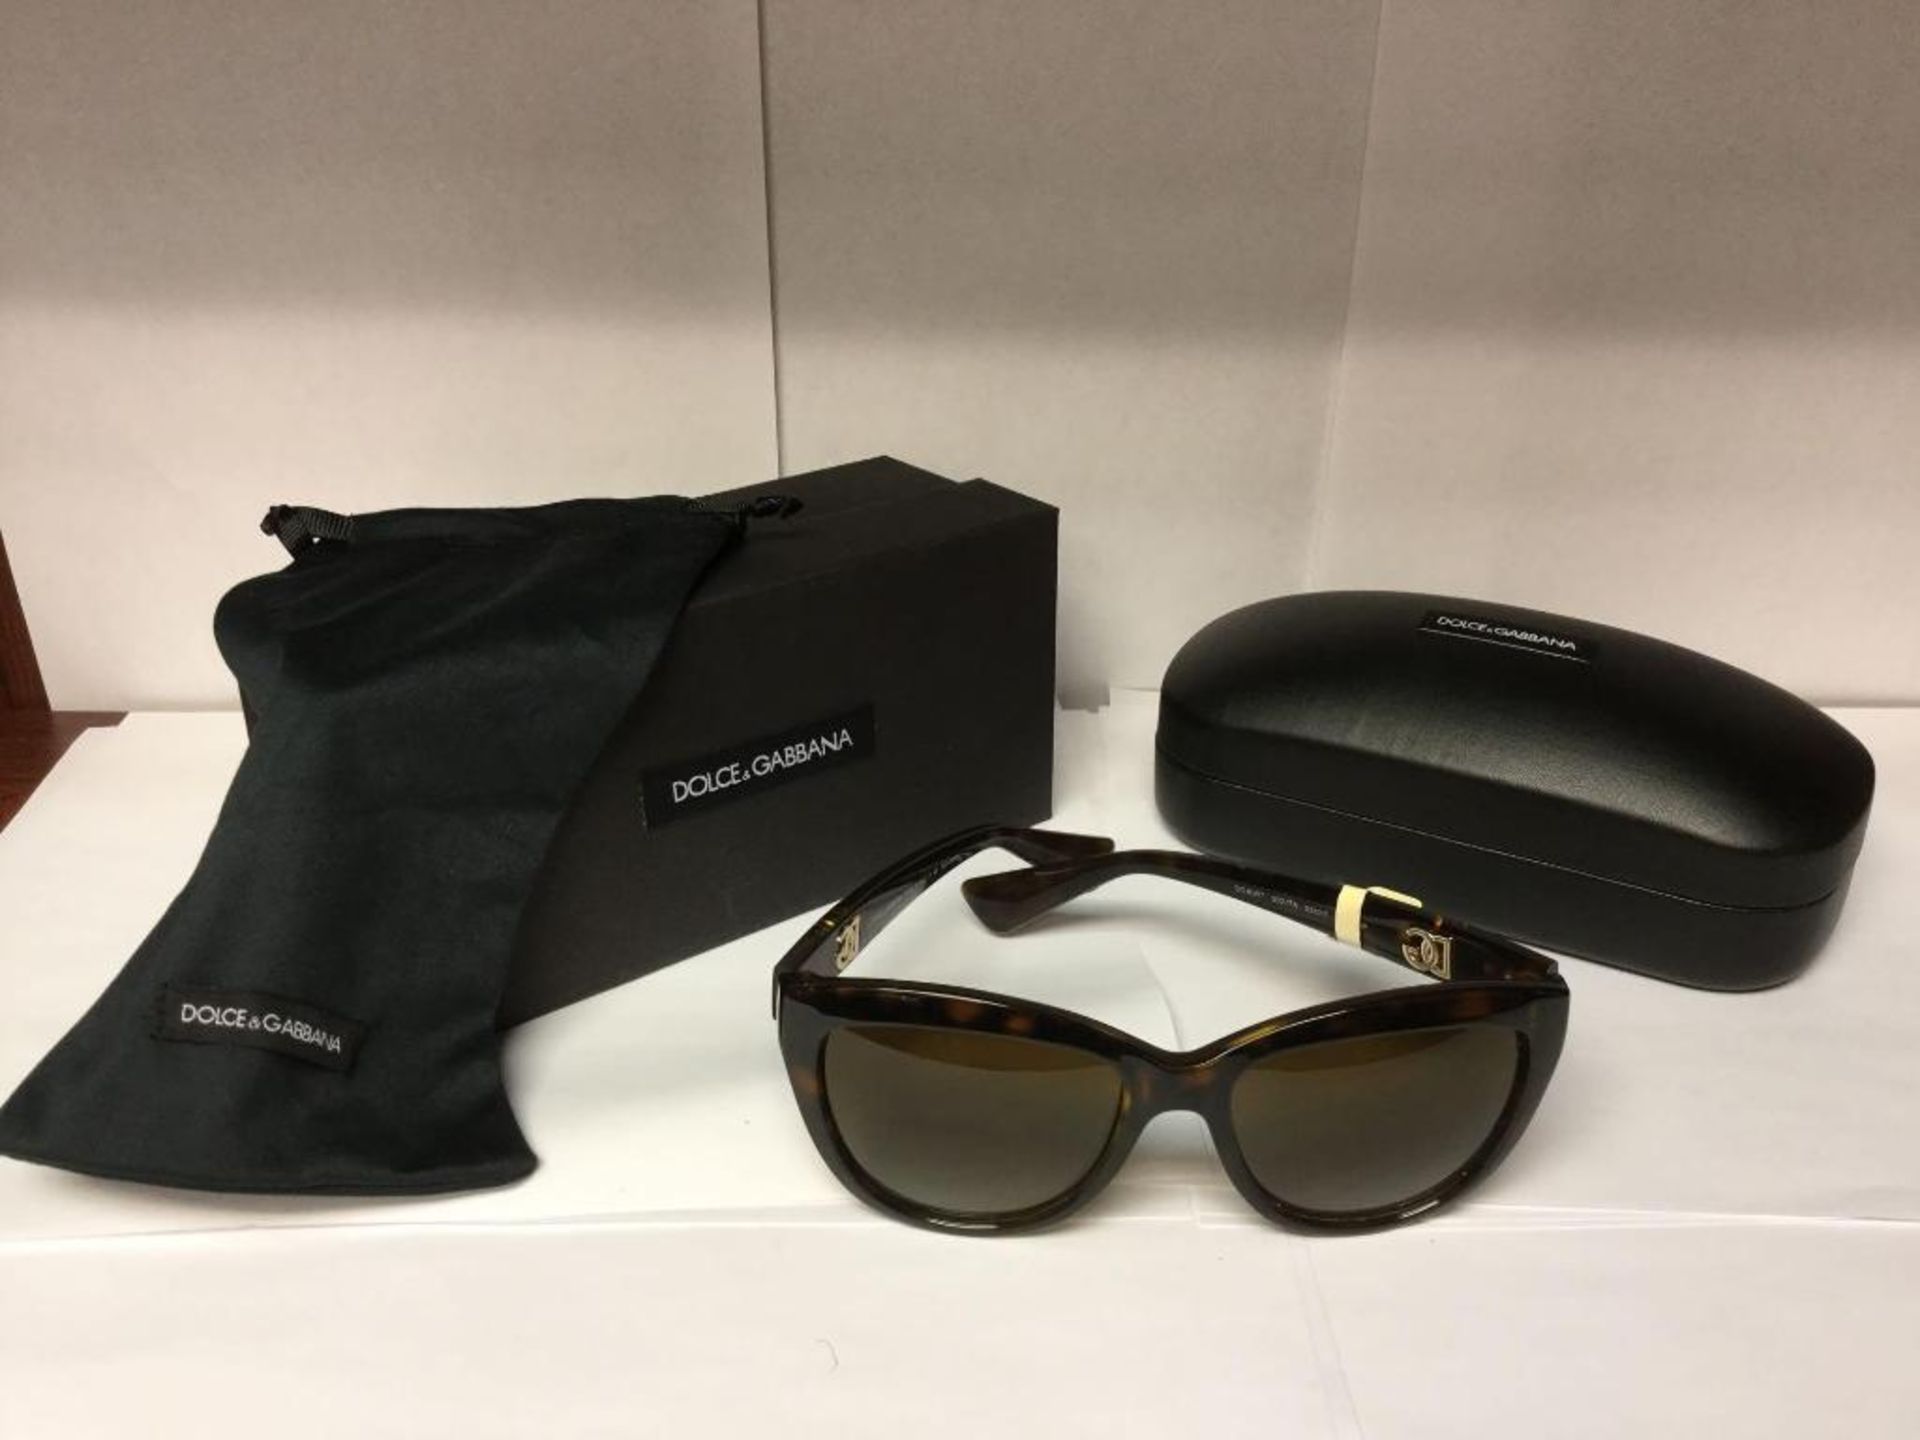 Dolce and Gabbana Sunglasses with Case box, bag and Cleaning cloth Value $ 290